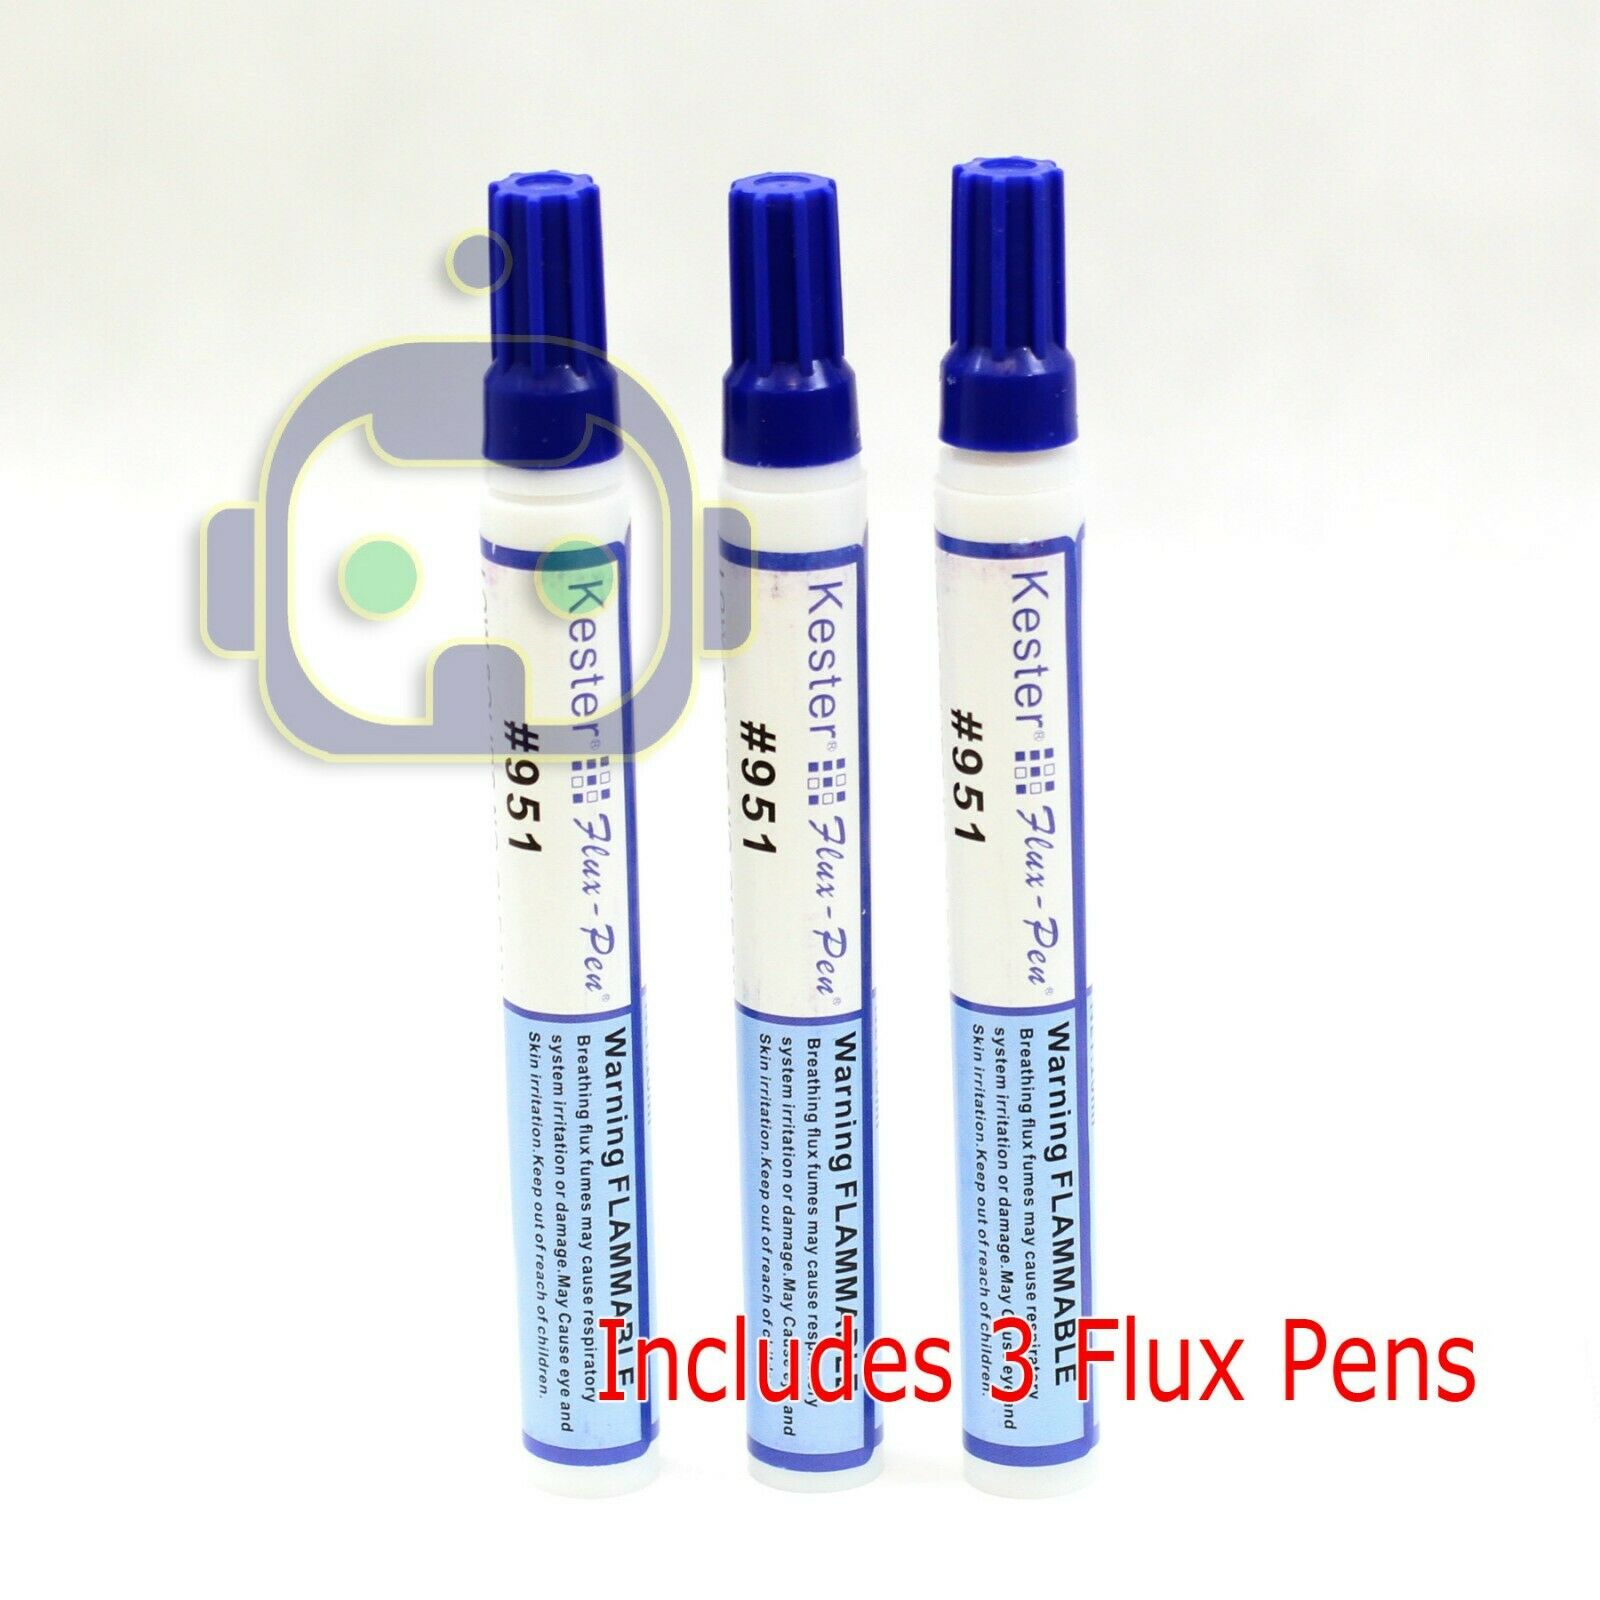 2pcs 951 Free-cleaning Soldering Flux Pen for Solar Cell & FPC/PCB 10ml Capacity